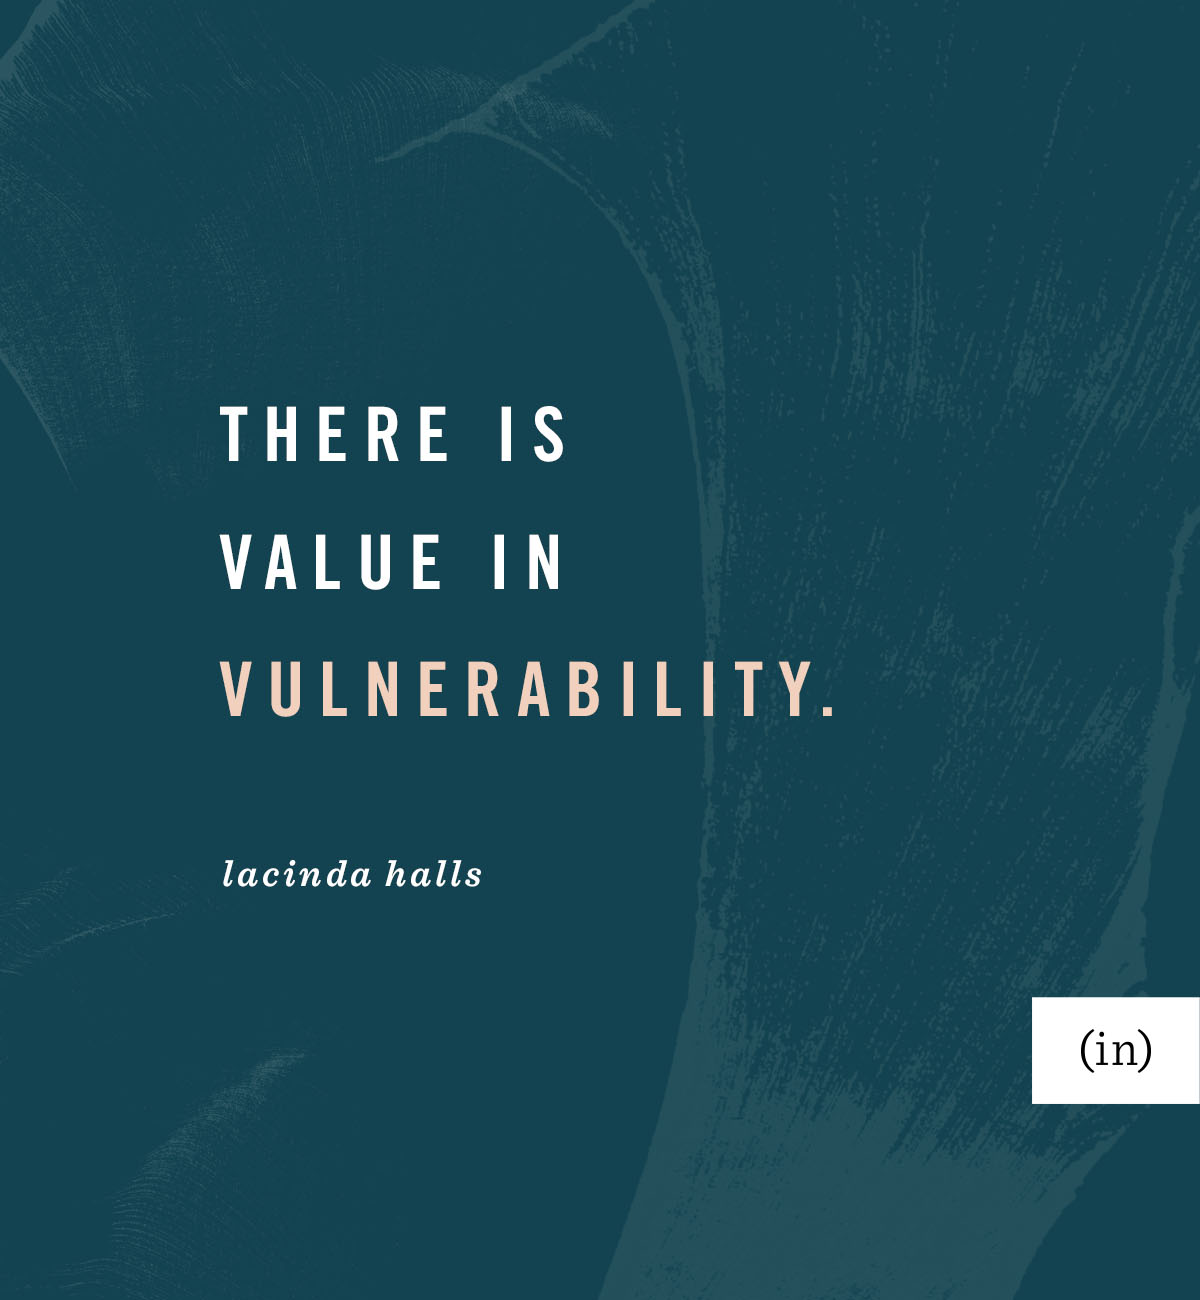 There is value in vulnerability. -LaCinda Halls